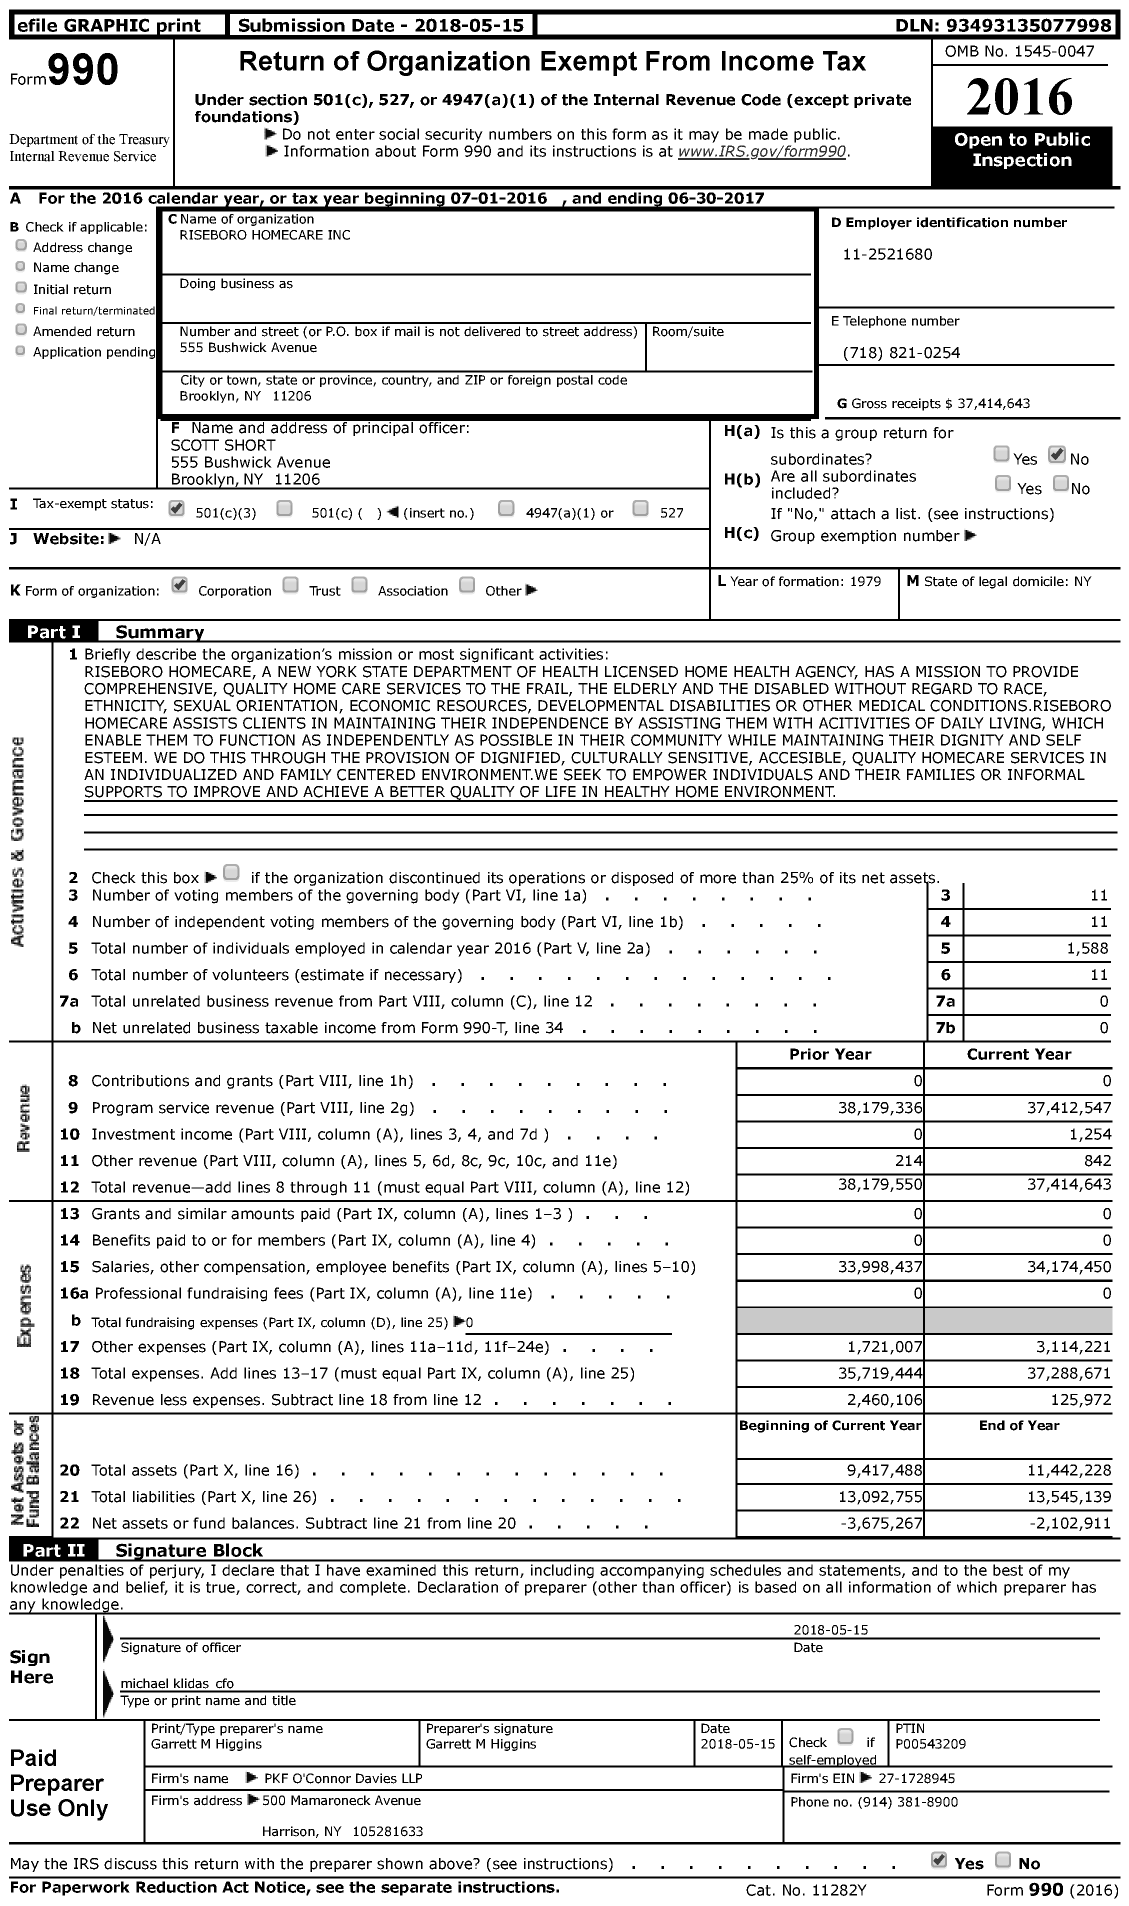 Image of first page of 2016 Form 990 for Riseboro Homecare (RBSCC)